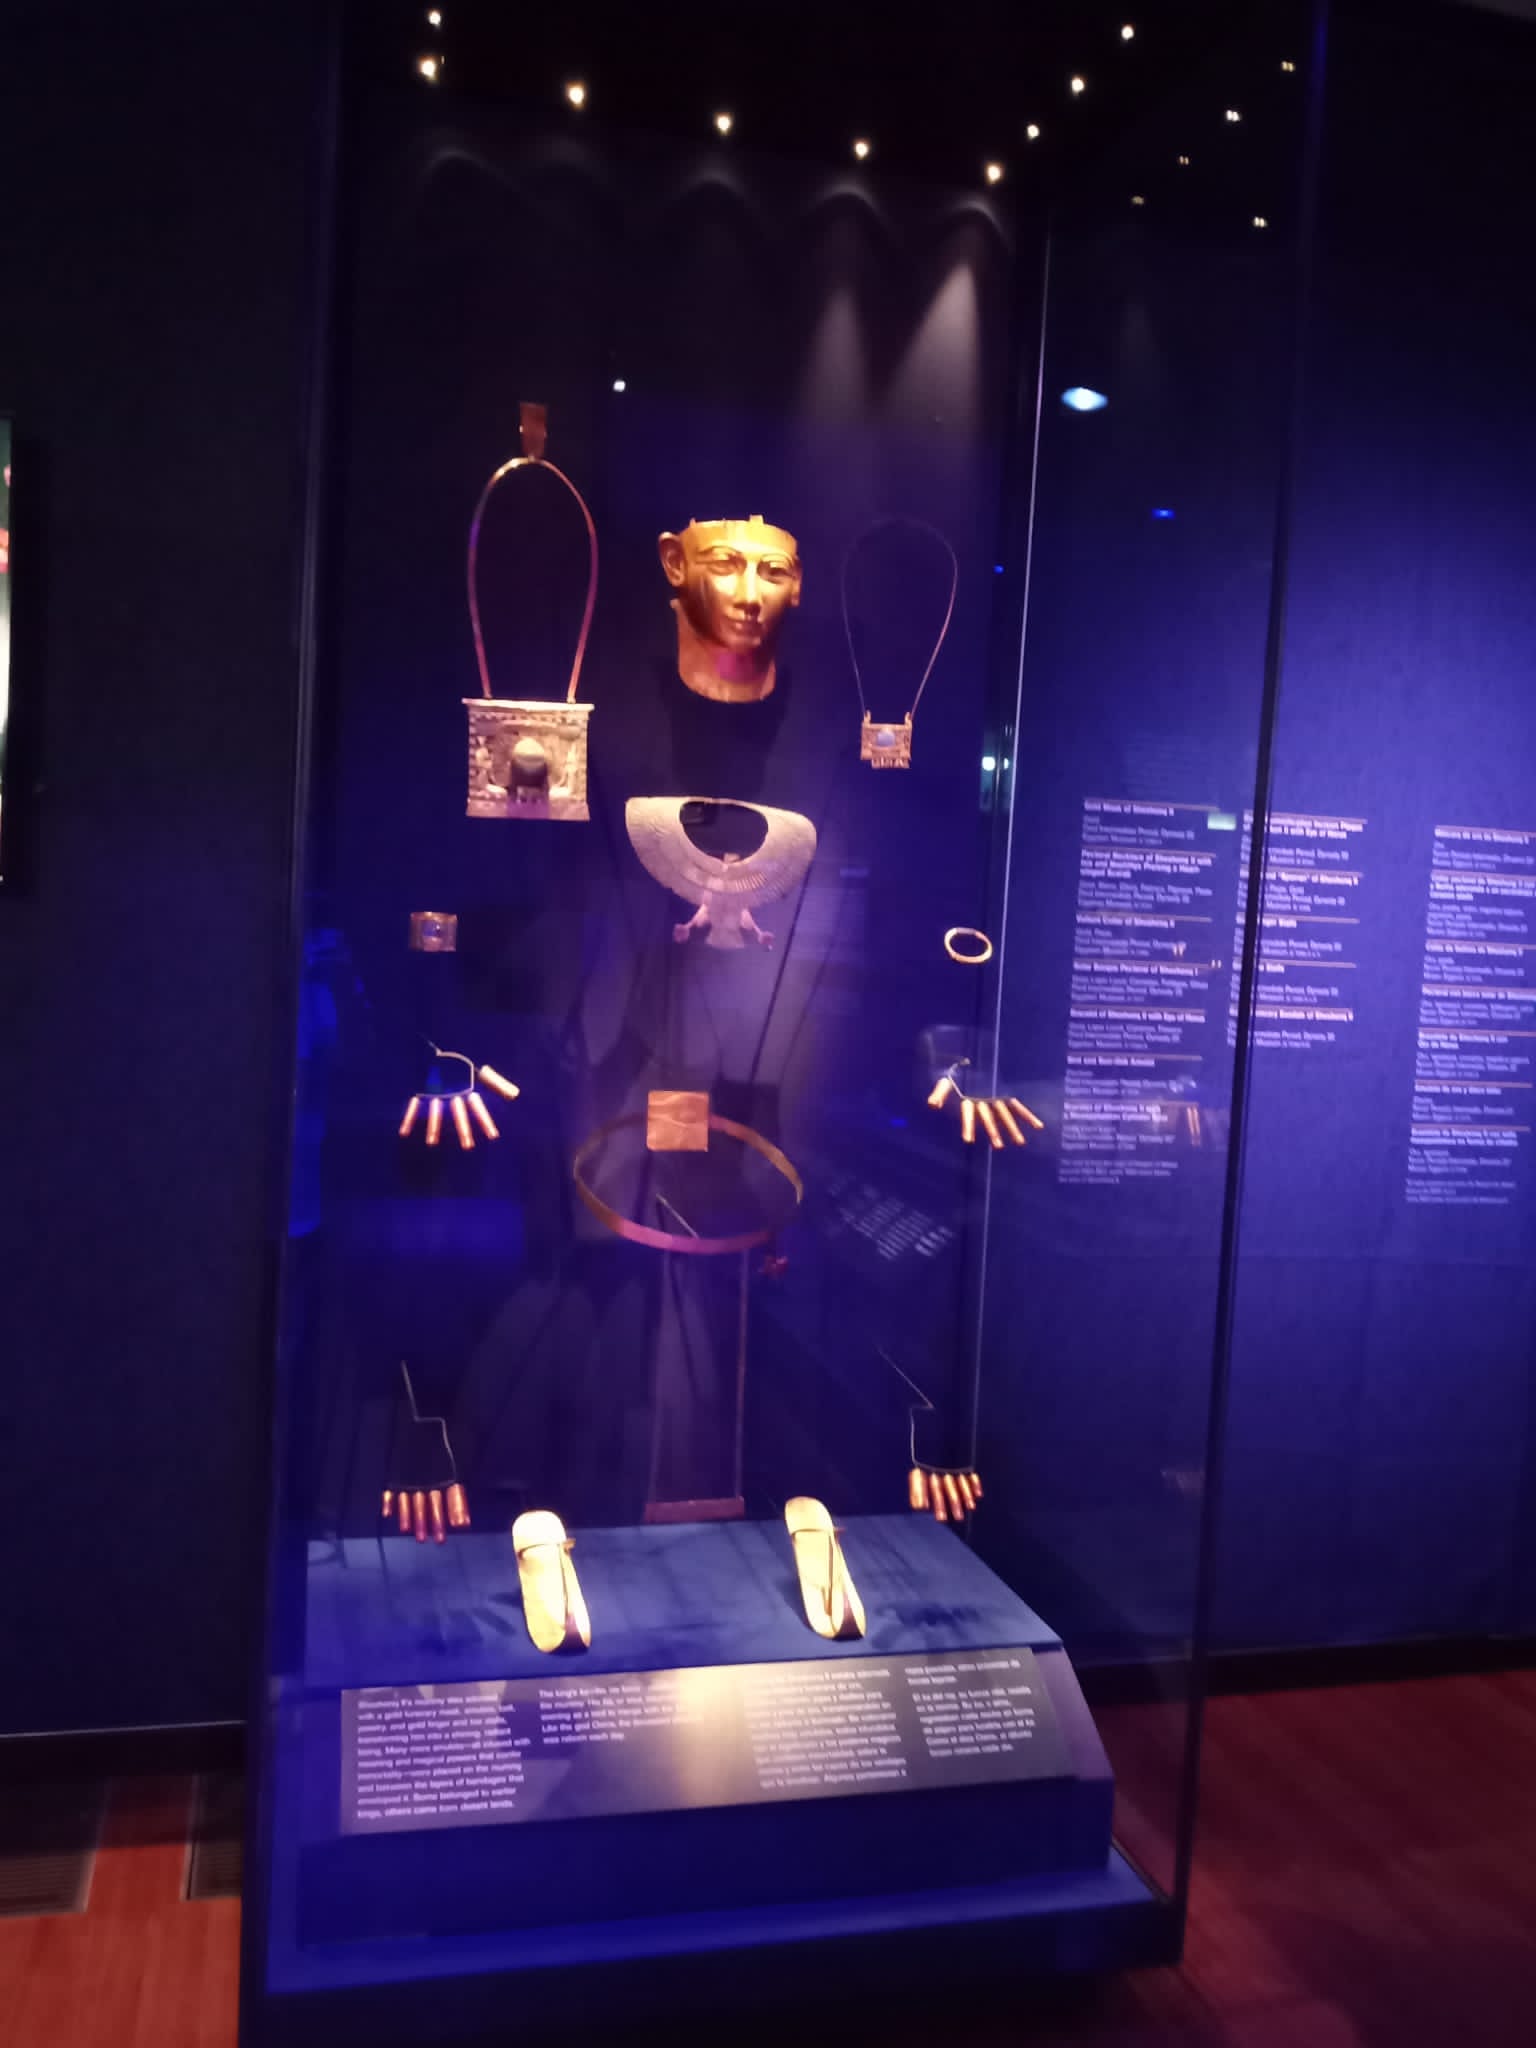 Ramses and the Pharaohs' Gold Exhibition in US